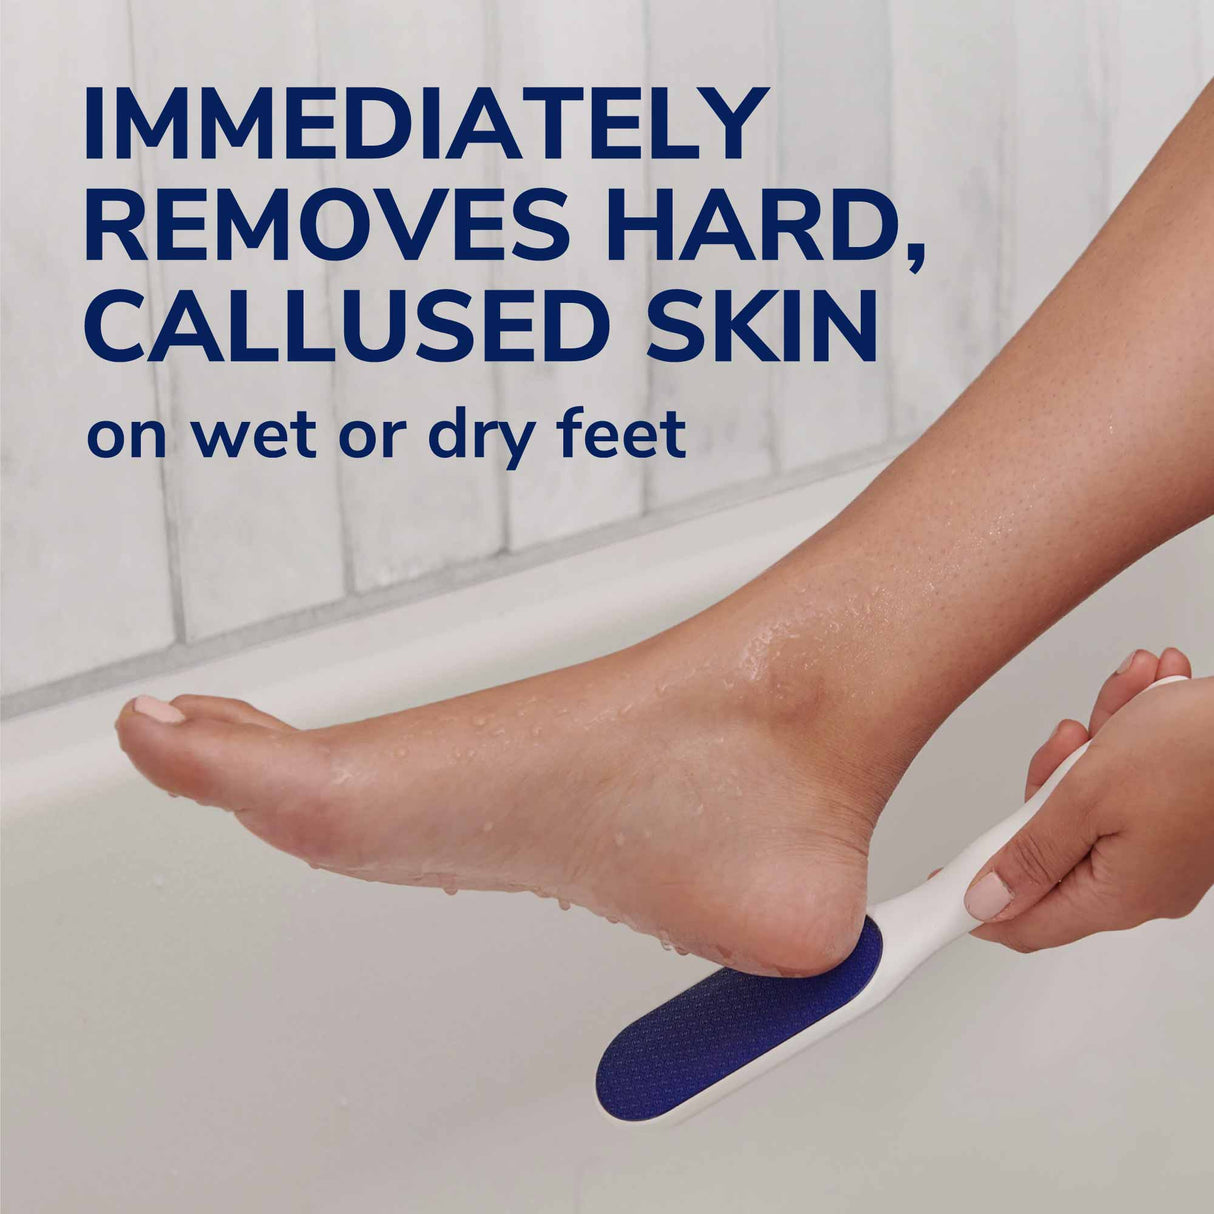 image of immediately removes hard, callused skin on wet or dry feet